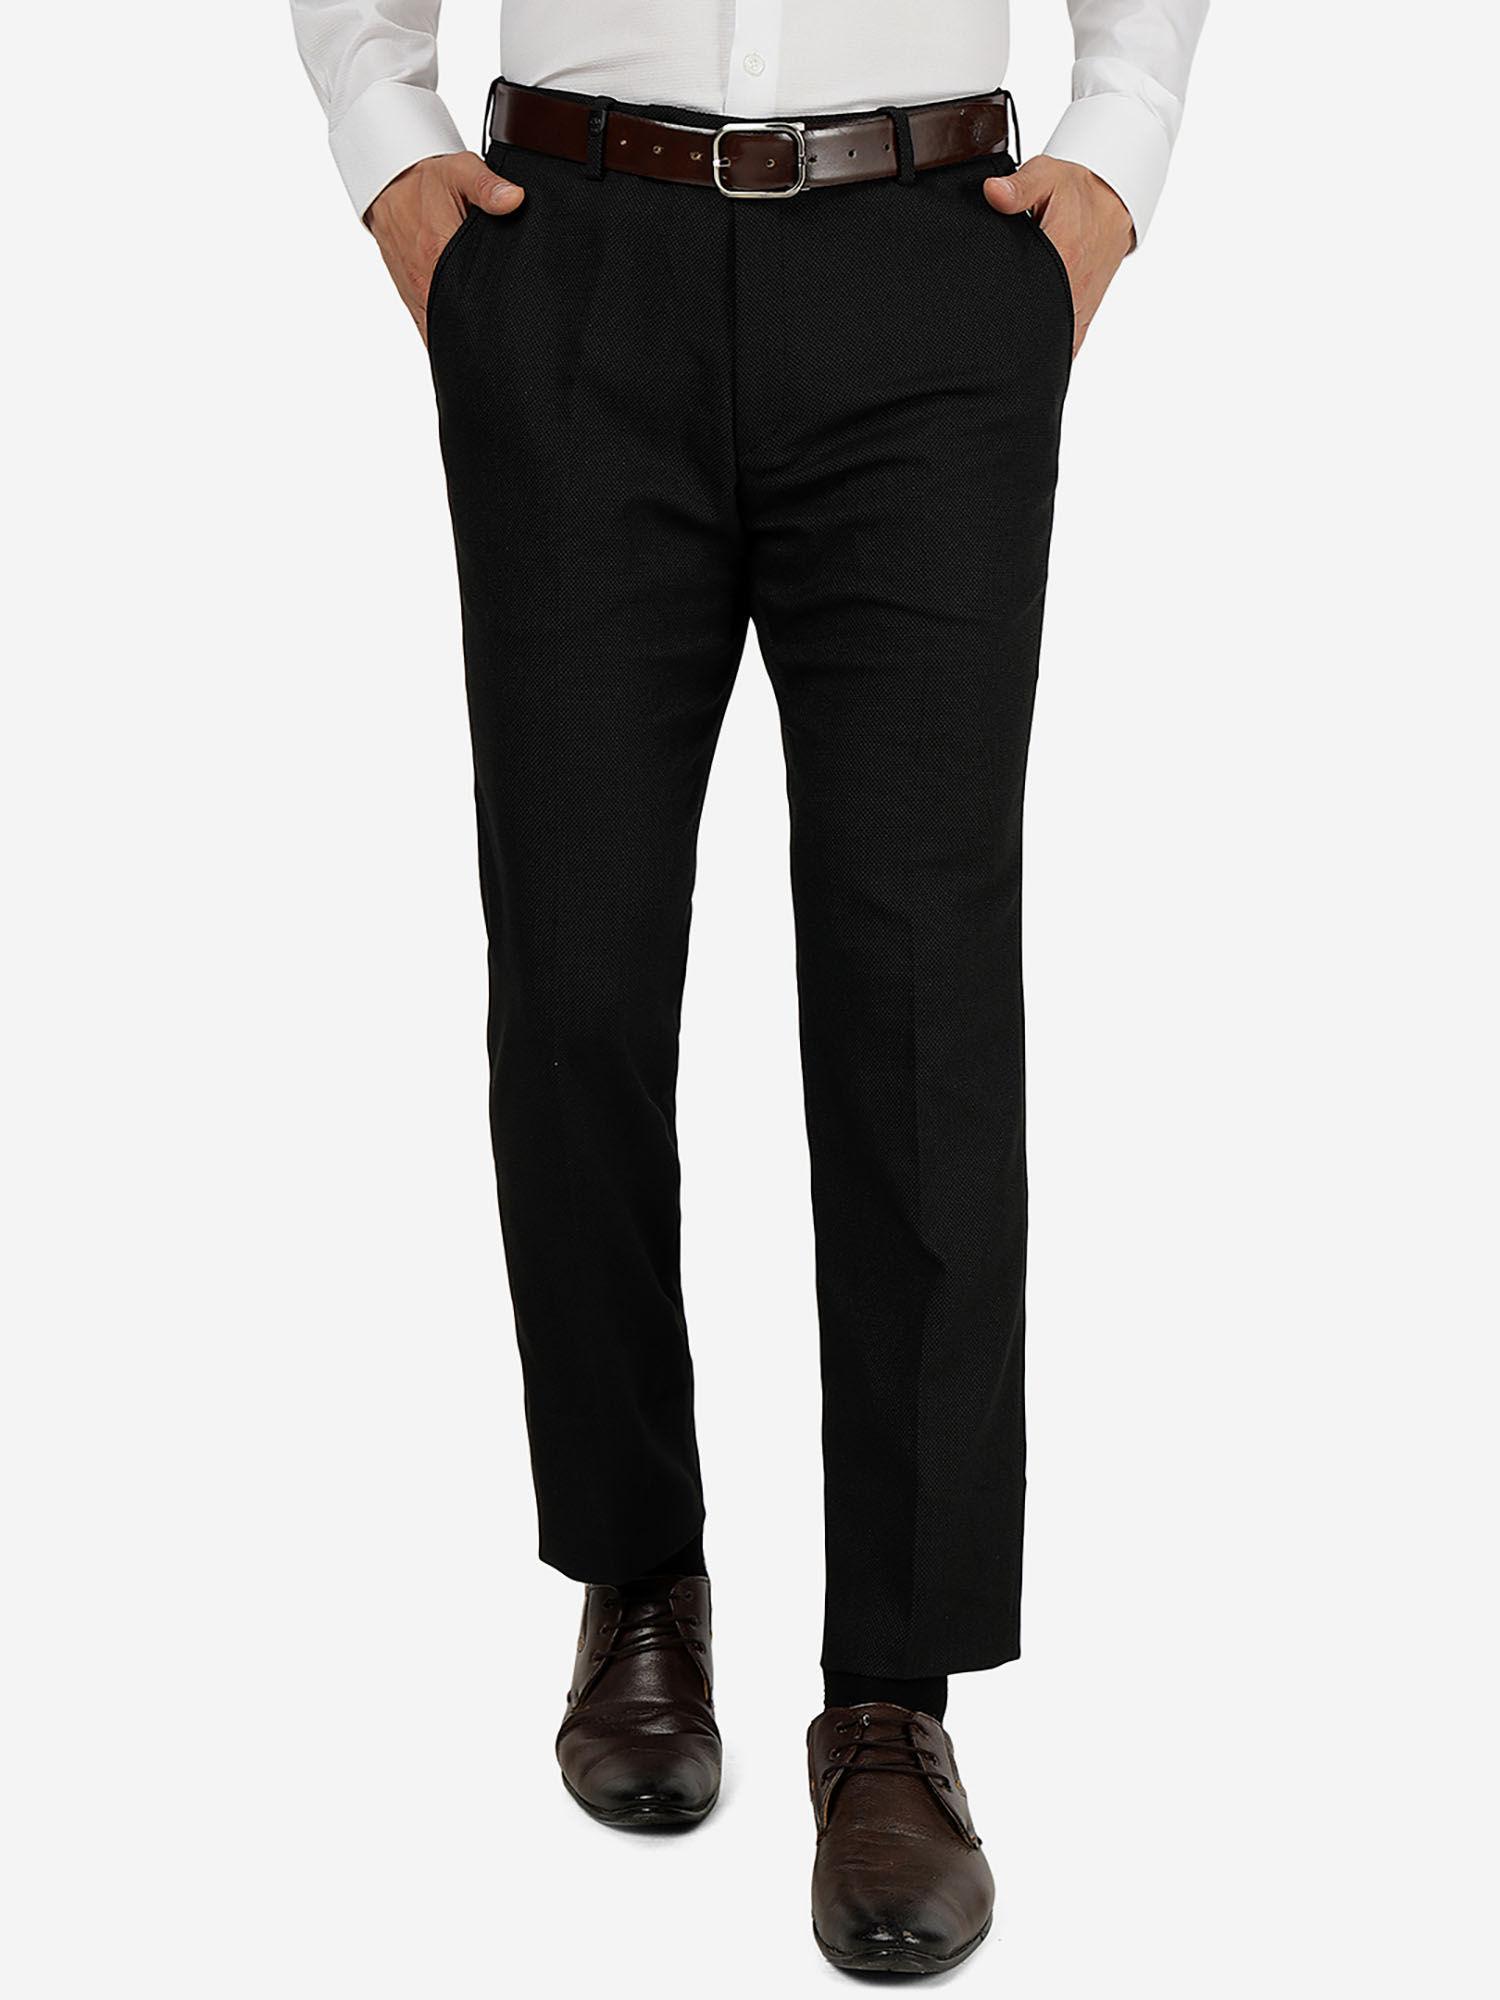 Men's Terry Rayon Solid Black Slim Fit Formal Trouser